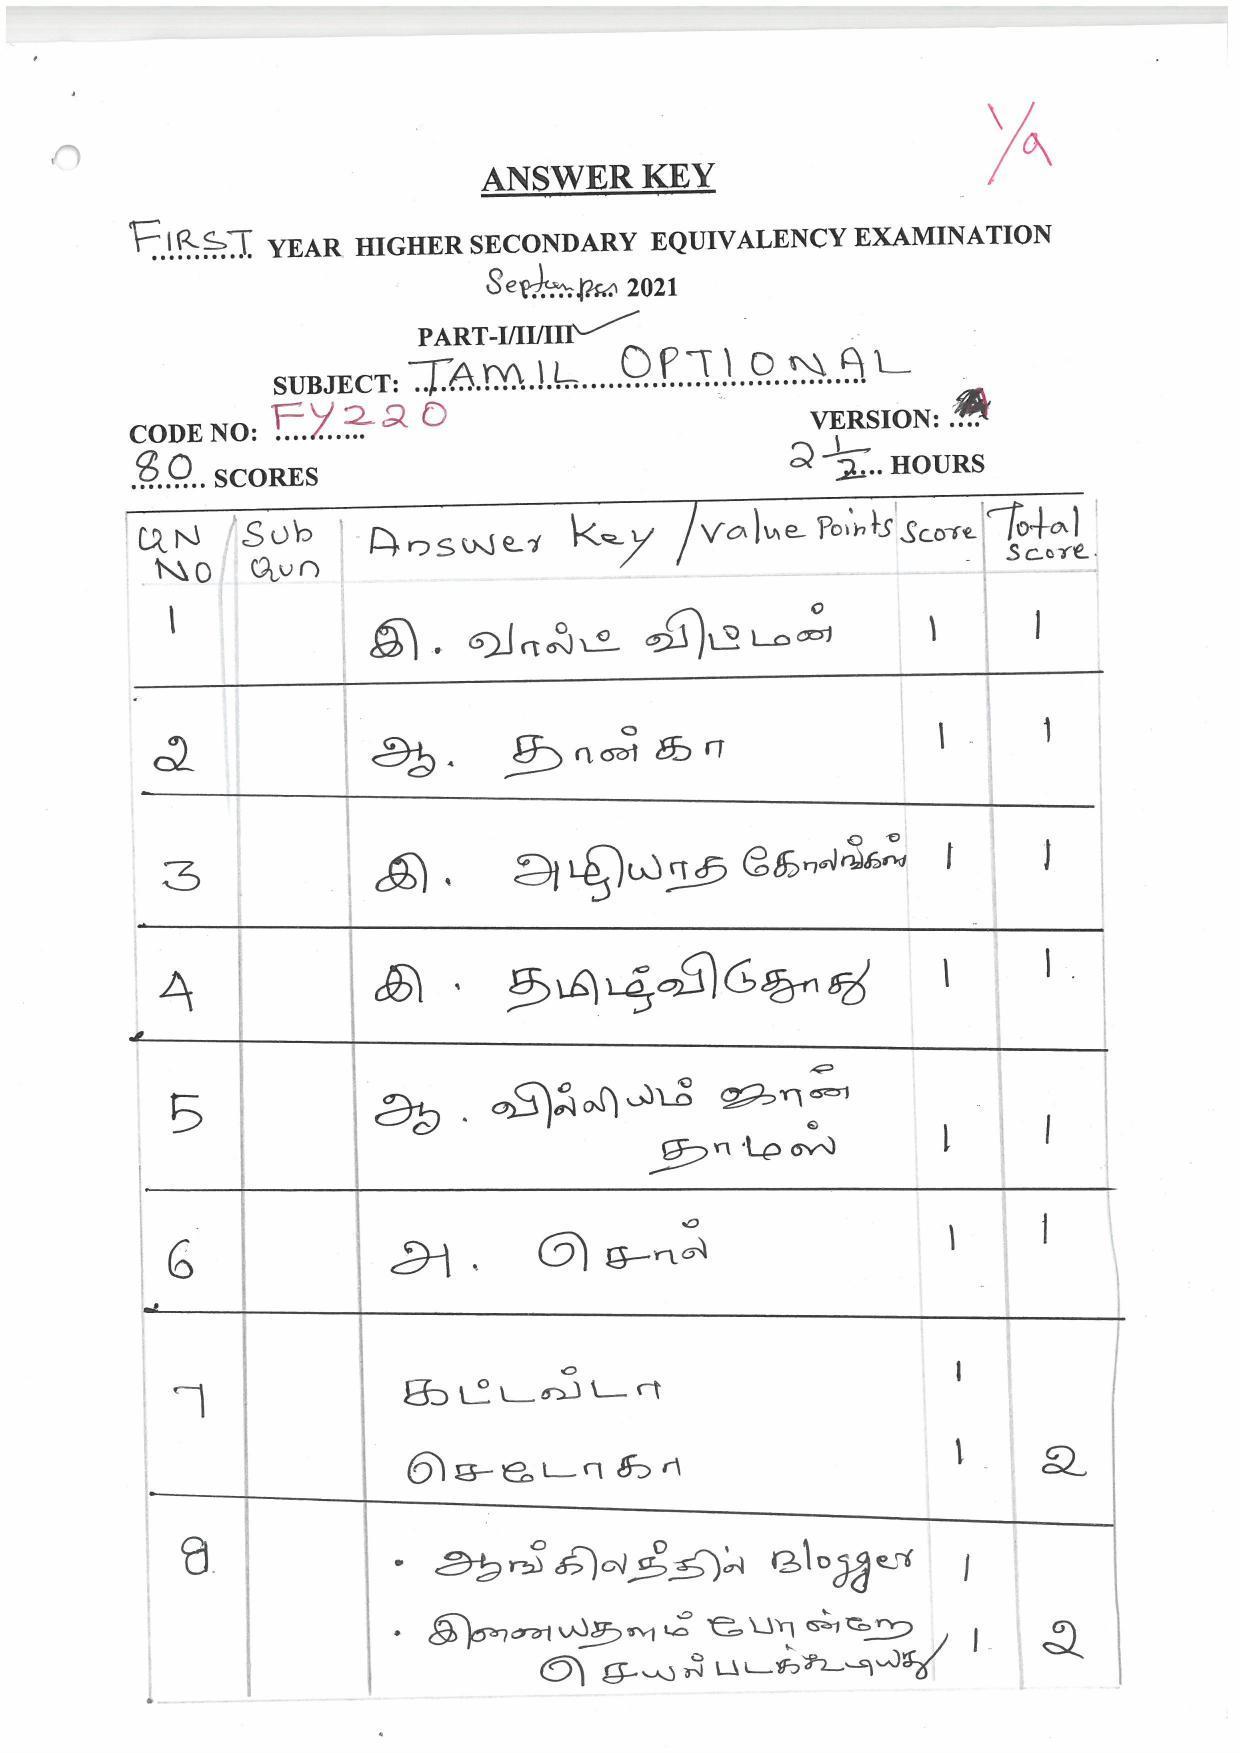 Kerala Plus One (Class 11th) Part-III Tamil-Optional Answer Key 2021 - Page 1